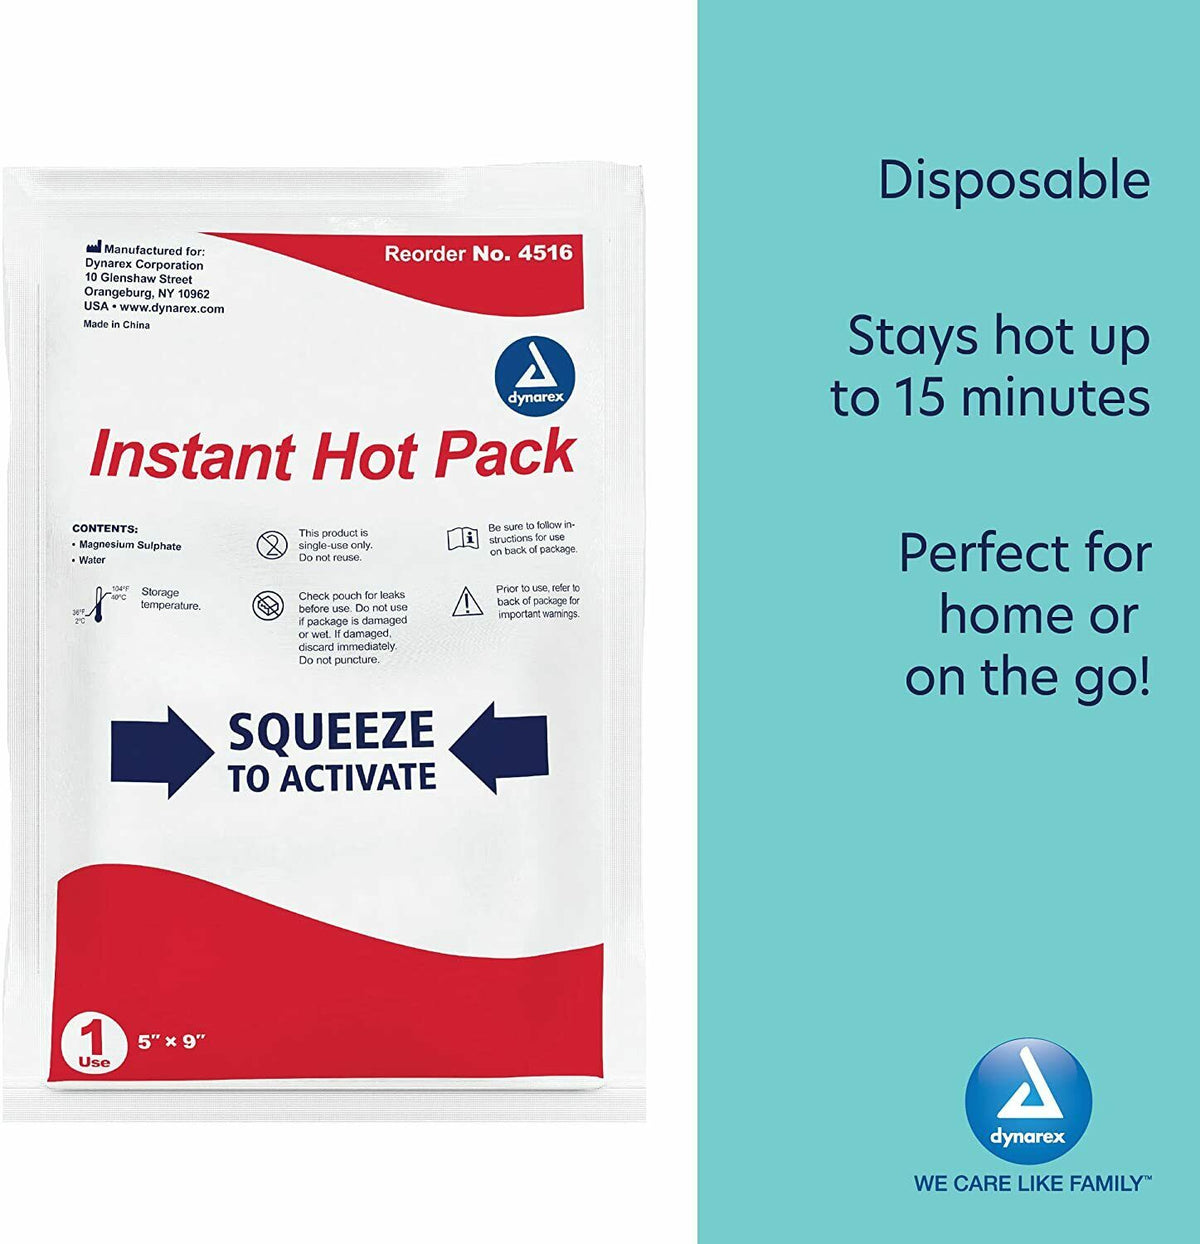 Instant Hot Pack 5 x 9